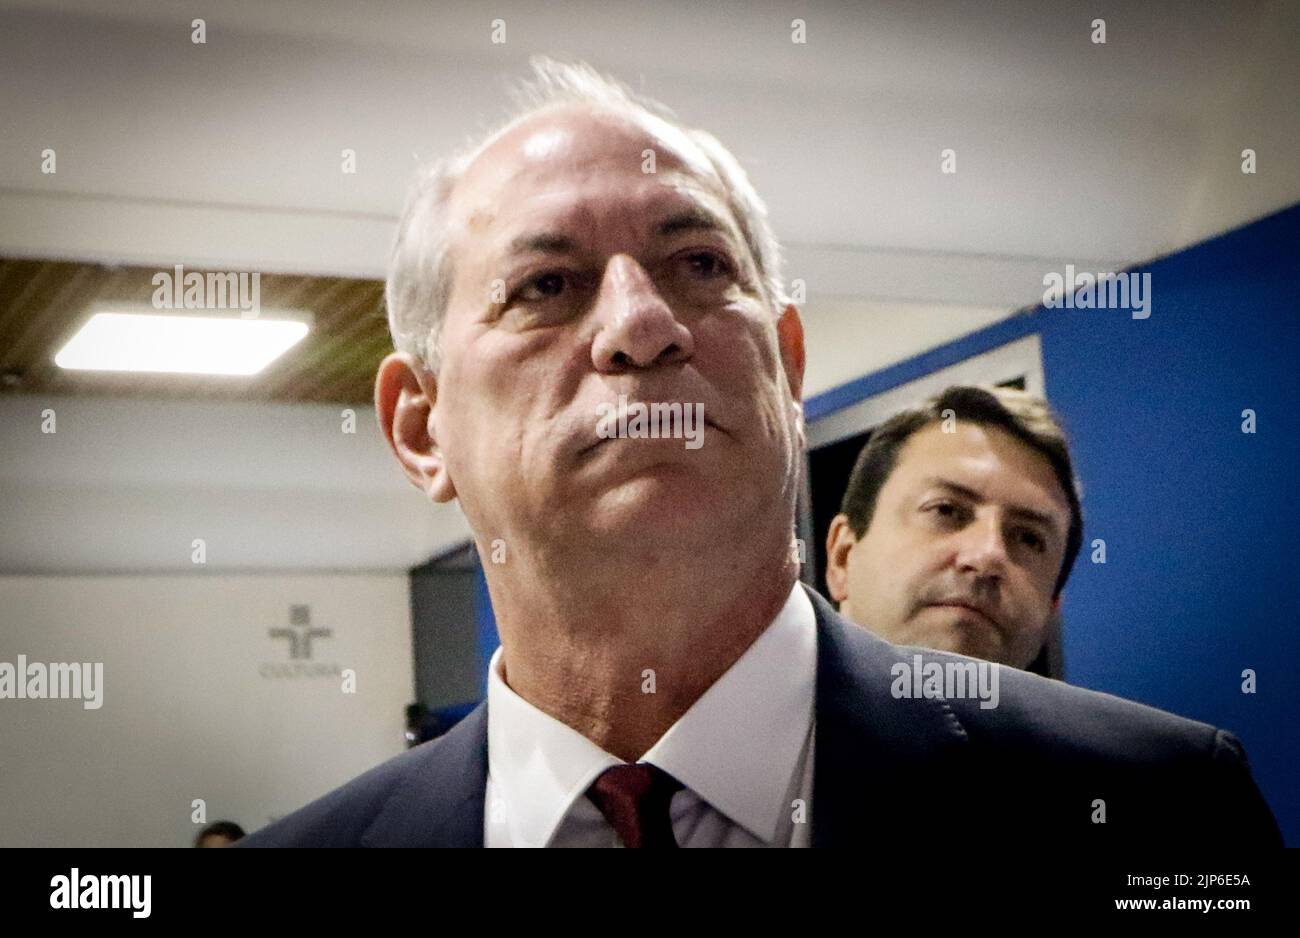 SÃO PAULO, SP - 15.08.2022: CIRO GOMES PARTICIPA DO RODA VIVA - The candidate for the Presidency of the Republic, Ciro Gomas (PDT) participates this Monday (15) in the series of interviews with presidential candidates in the 2022 elections, on TV Cultura's Roda ViVa program, located in the north of the city of São Paulo. (Photo: Aloisio Mauricio/Fotoarena) Stock Photo